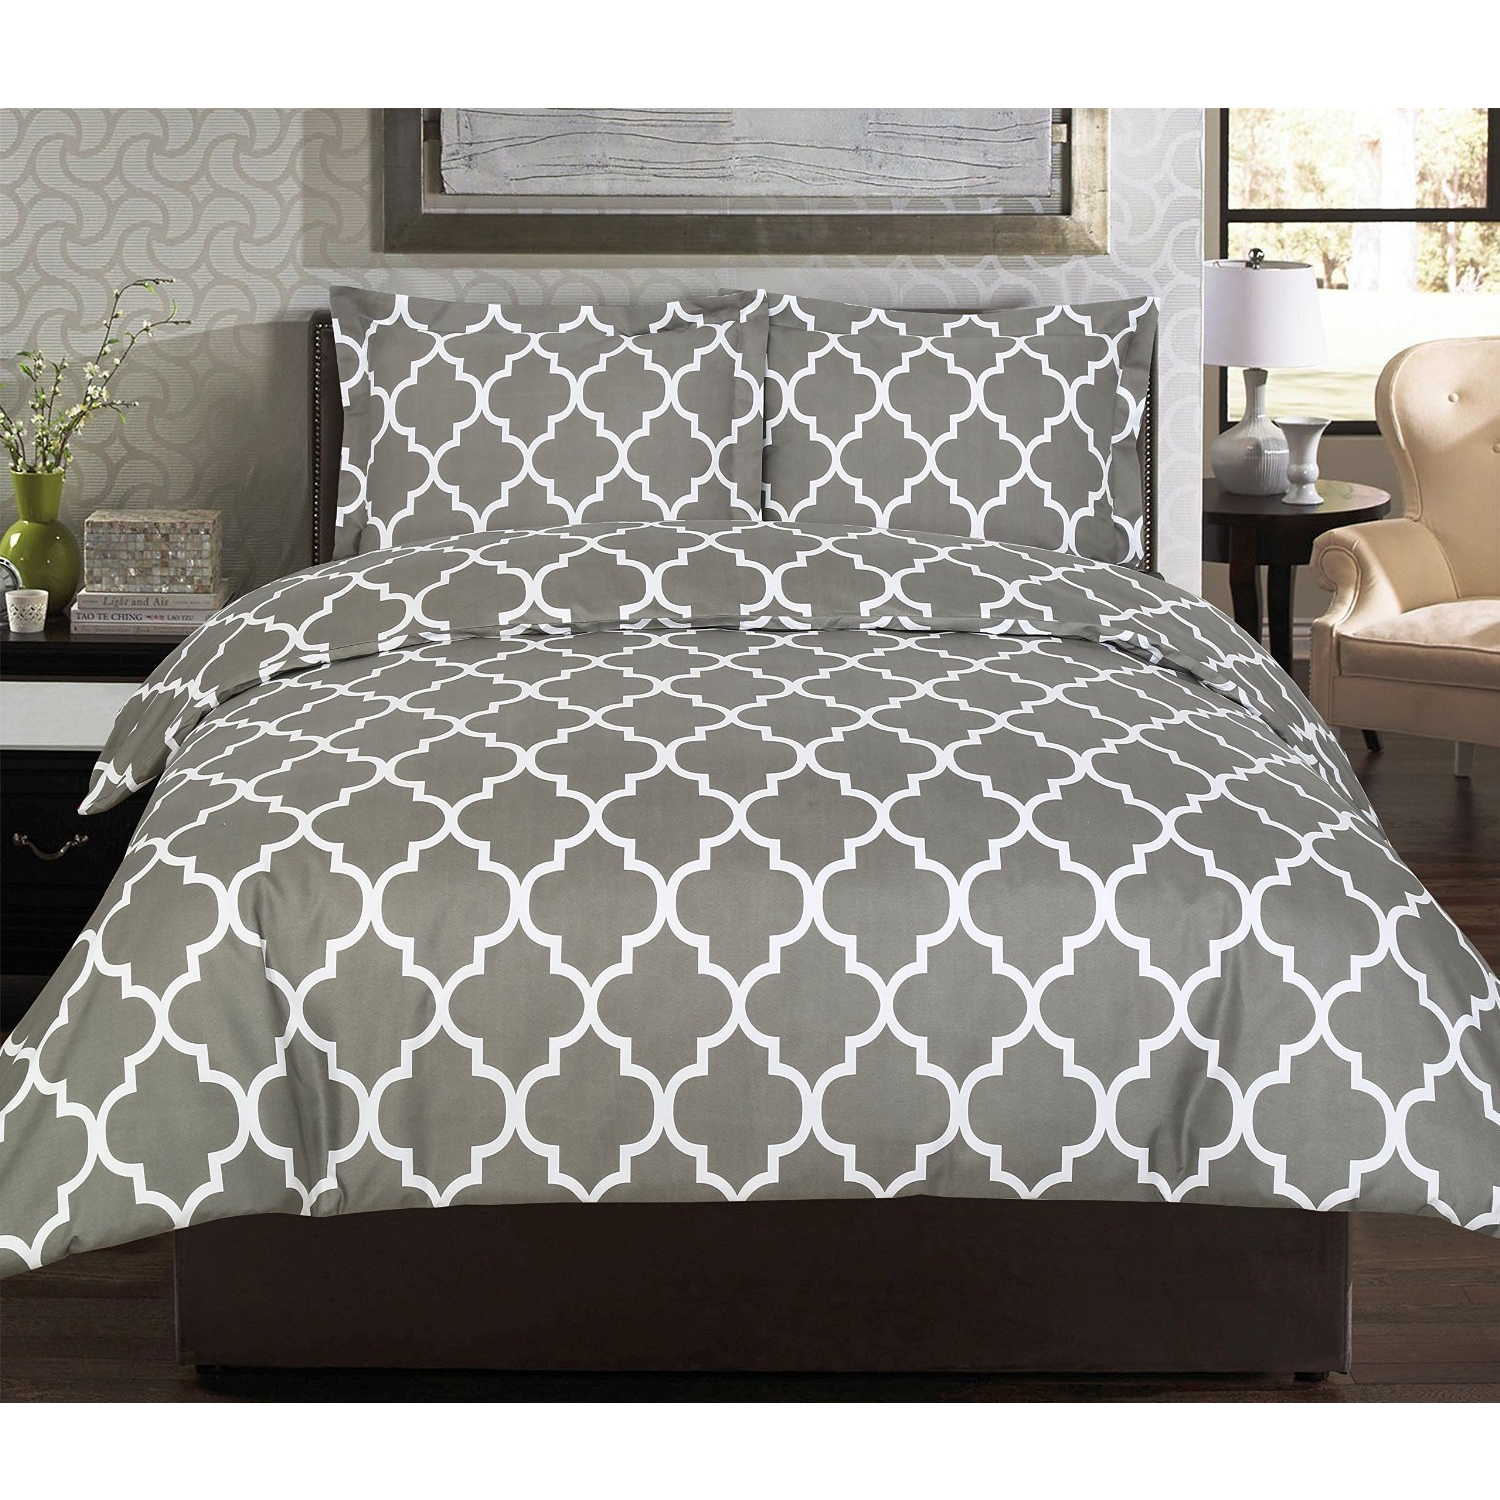 Amazon: 3 Piece Duvet Cover Set Only $25.99! (Queen & King) Choose From Grey & Navy!